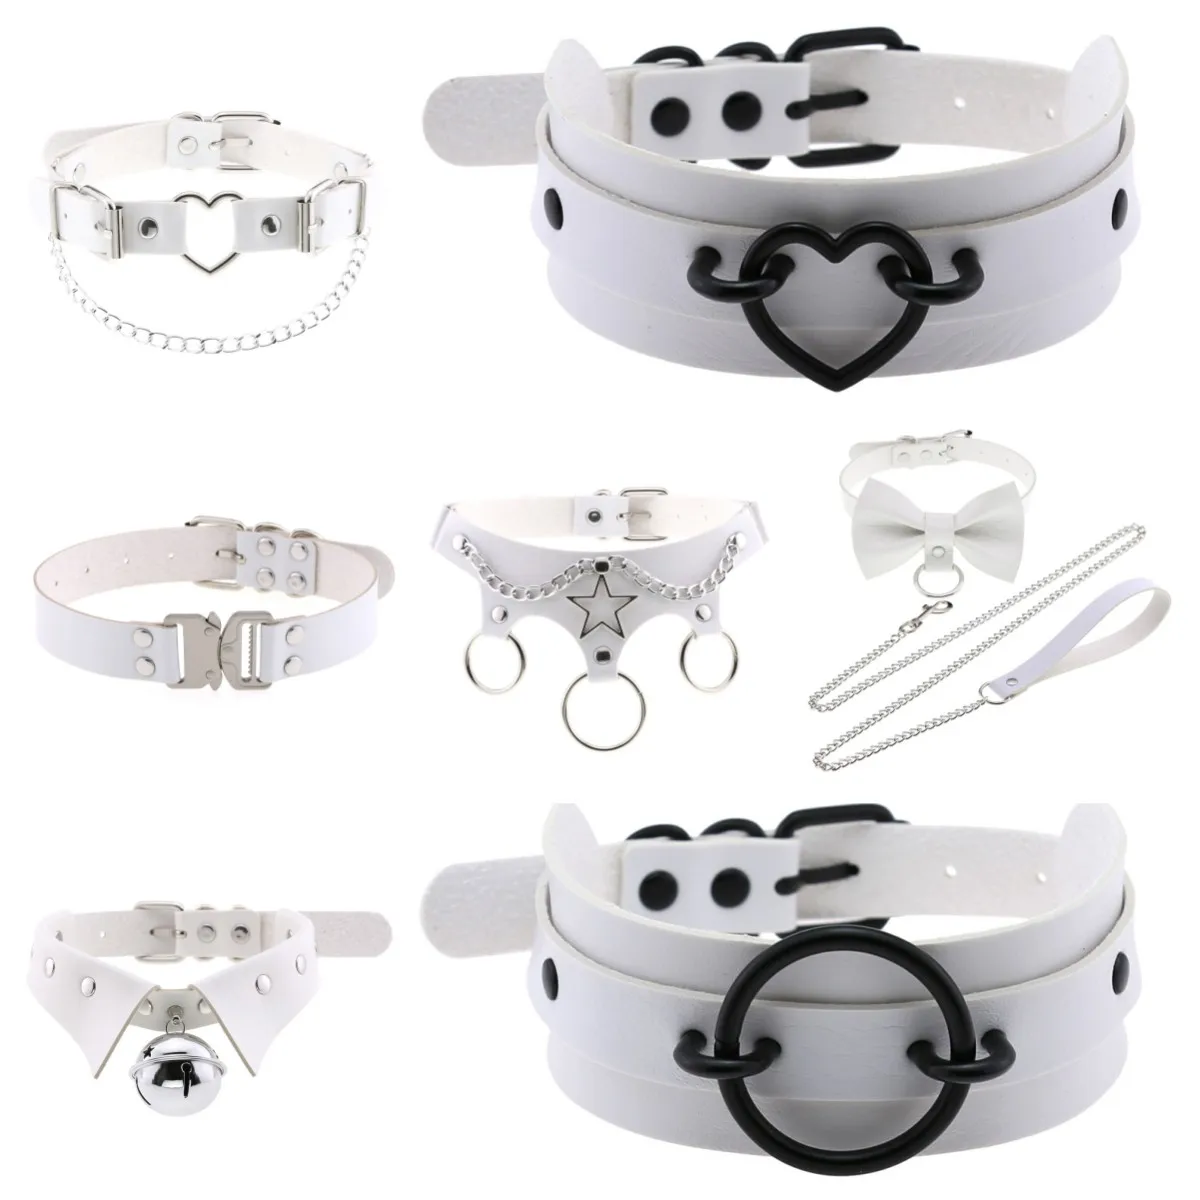 

Sexy Punk Rock Gothic White Chokers Chains Necklace PU Leather Bondage Cosplay Goth Collar for Women Y2K Jewelry Statement Gifts